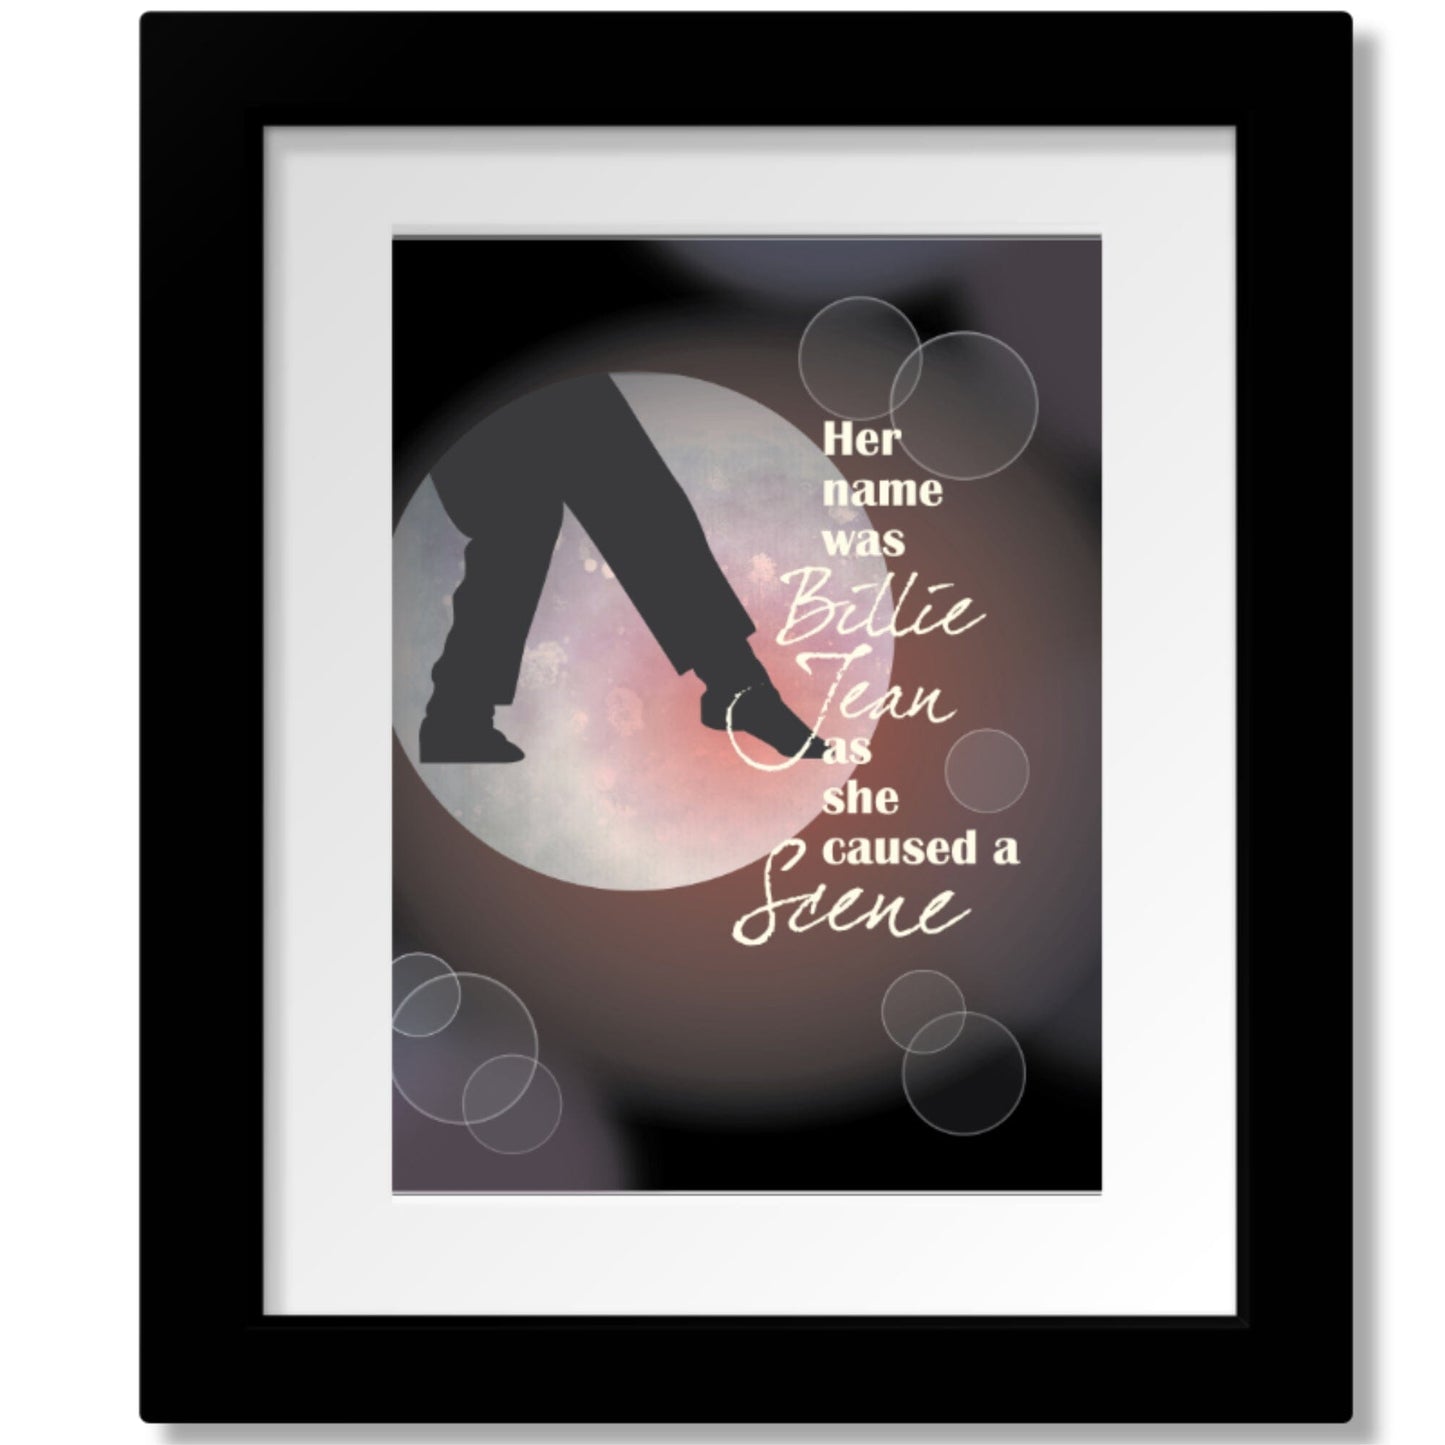 Billie Jean by Michael Jackson - 80s Song Lyric Artwork Print Song Lyrics Art Song Lyrics Art 8x10 Matted and Framed Print 